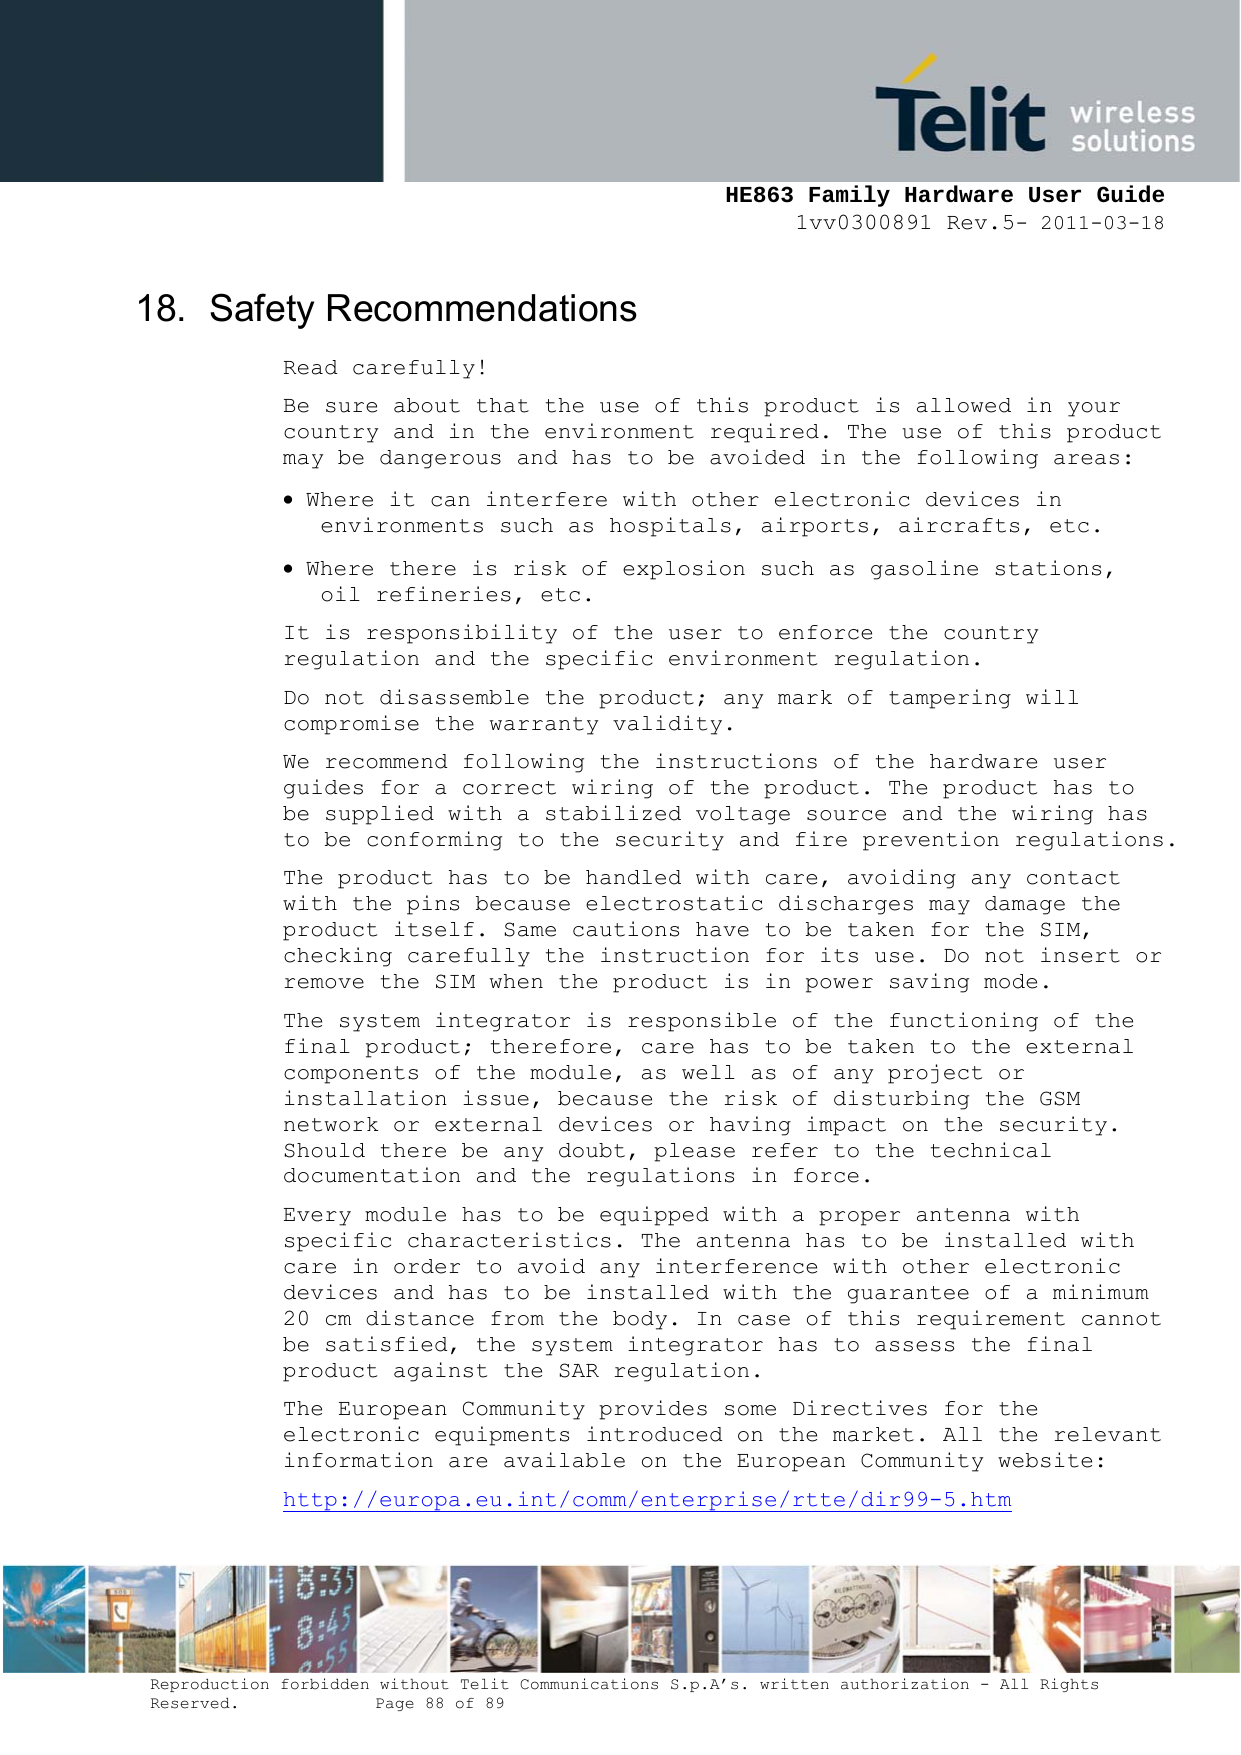     HE863 Family Hardware User Guide 1vv0300891 Rev.5- 2011-03-18    Reproduction forbidden without Telit Communications S.p.A’s. written authorization - All Rights Reserved.    Page 88 of 89  18. Safety Recommendations Read carefully! Be sure about that the use of this product is allowed in your country and in the environment required. The use of this product may be dangerous and has to be avoided in the following areas:  Where it can interfere with other electronic devices in environments such as hospitals, airports, aircrafts, etc.  Where there is risk of explosion such as gasoline stations, oil refineries, etc.  It is responsibility of the user to enforce the country regulation and the specific environment regulation. Do not disassemble the product; any mark of tampering will compromise the warranty validity. We recommend following the instructions of the hardware user guides for a correct wiring of the product. The product has to be supplied with a stabilized voltage source and the wiring has to be conforming to the security and fire prevention regulations. The product has to be handled with care, avoiding any contact with the pins because electrostatic discharges may damage the product itself. Same cautions have to be taken for the SIM, checking carefully the instruction for its use. Do not insert or remove the SIM when the product is in power saving mode. The system integrator is responsible of the functioning of the final product; therefore, care has to be taken to the external components of the module, as well as of any project or installation issue, because the risk of disturbing the GSM network or external devices or having impact on the security. Should there be any doubt, please refer to the technical documentation and the regulations in force. Every module has to be equipped with a proper antenna with specific characteristics. The antenna has to be installed with care in order to avoid any interference with other electronic devices and has to be installed with the guarantee of a minimum 20 cm distance from the body. In case of this requirement cannot be satisfied, the system integrator has to assess the final product against the SAR regulation. The European Community provides some Directives for the electronic equipments introduced on the market. All the relevant information are available on the European Community website: http://europa.eu.int/comm/enterprise/rtte/dir99-5.htm 